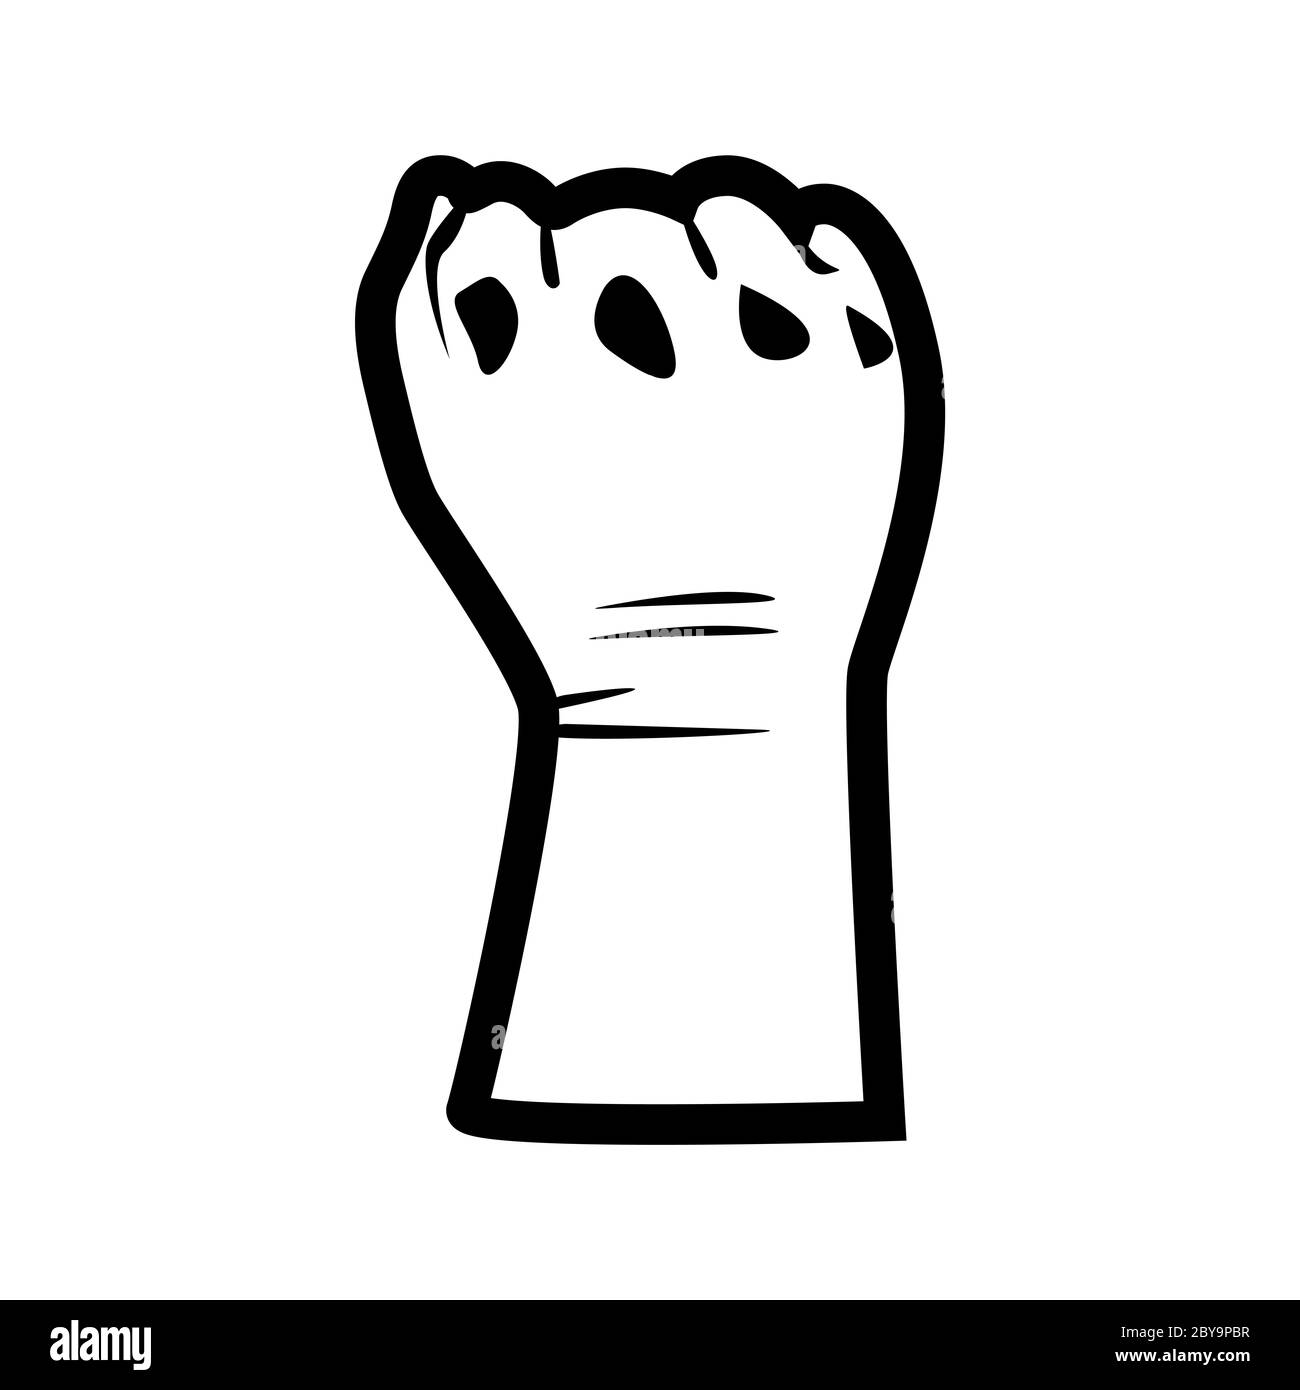 Hand symbol for black lives matter protest in USA to stop violence to black people. Fight for human right of Black People in U.S. America. Flat style Stock Photo